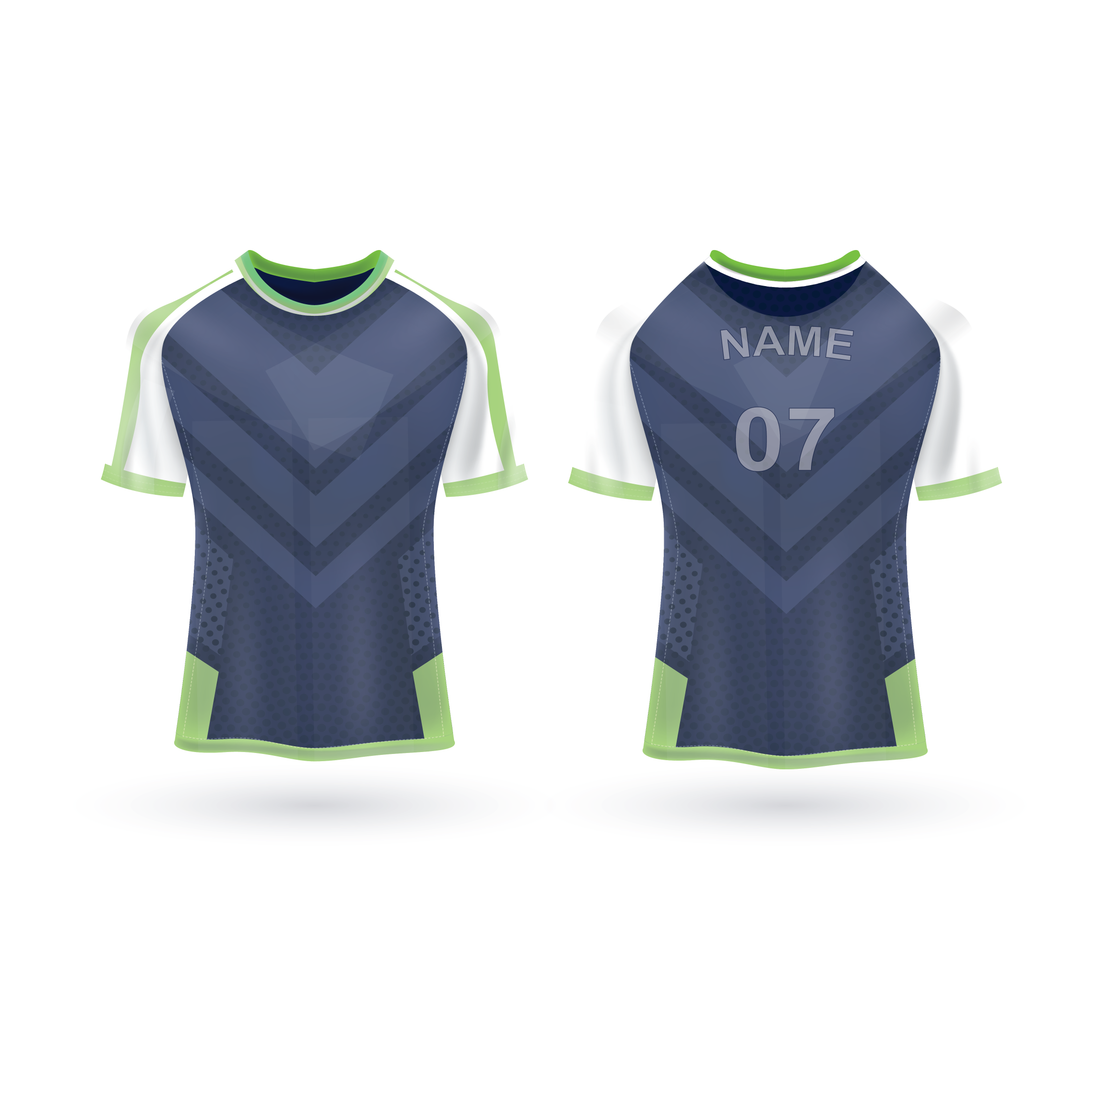 NEXT PRINT All Over Printed Customized Sublimation T-Shirt Unisex Sports Jersey Player Name & Number, Team Name NP50000206